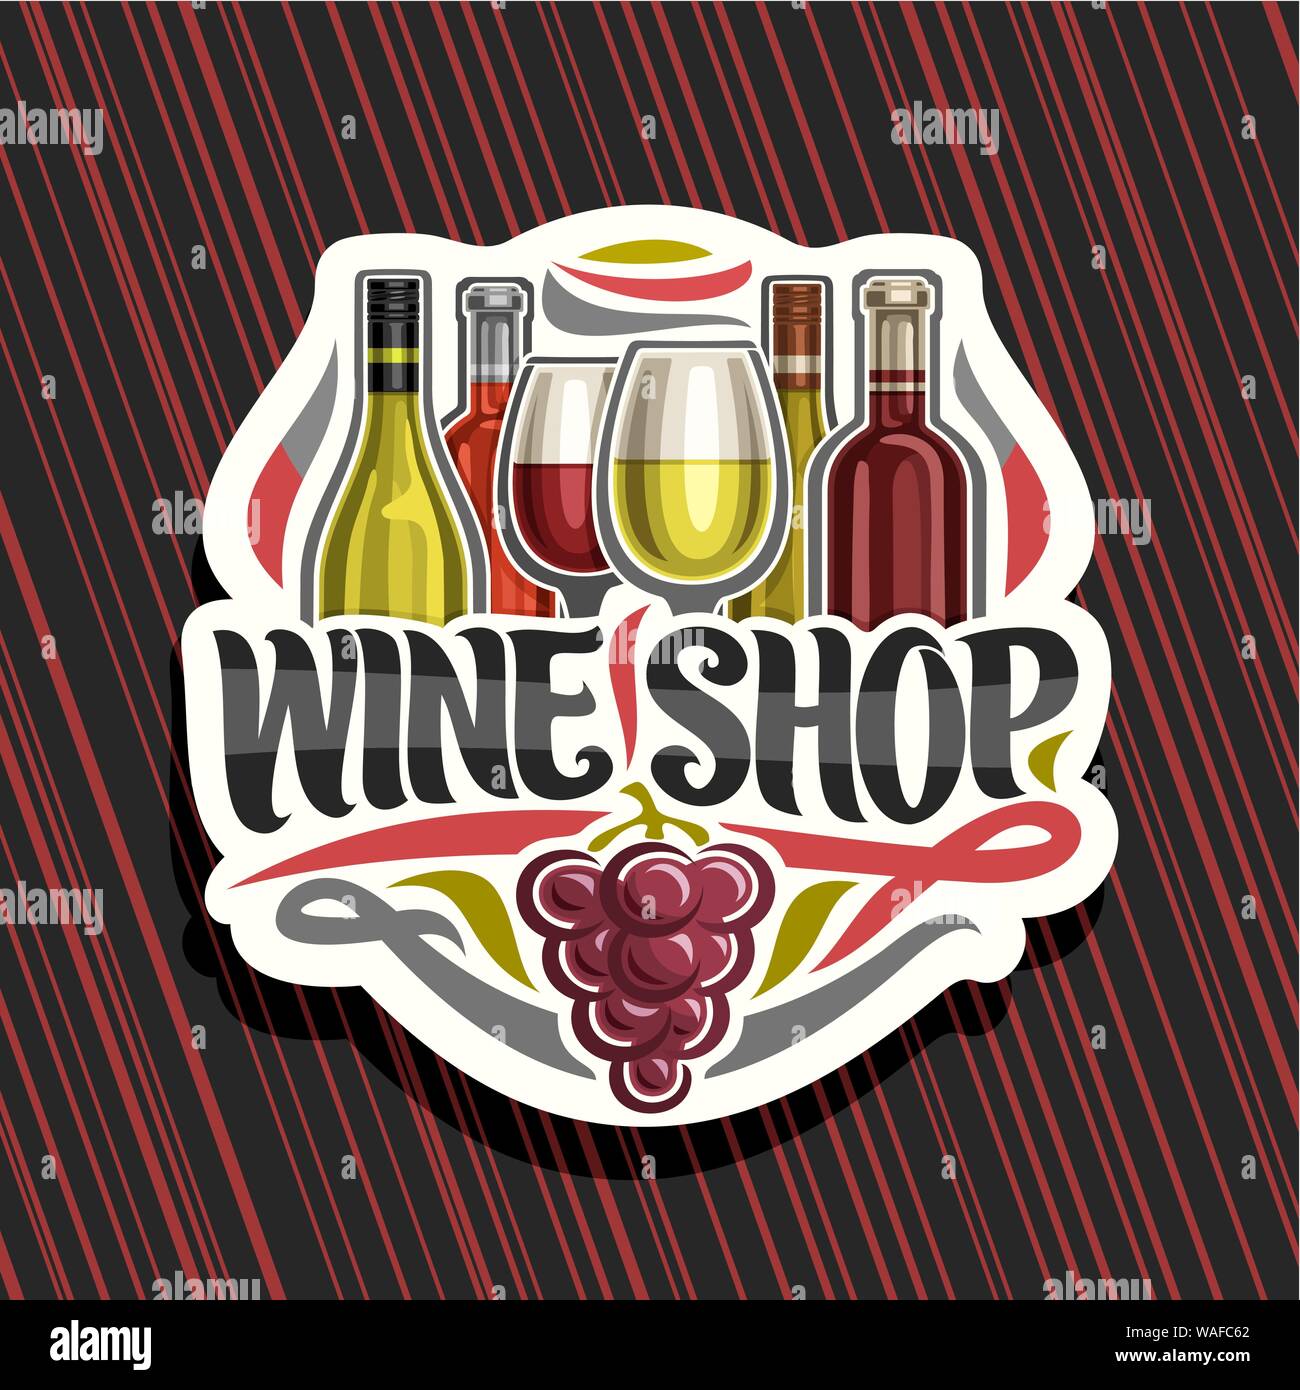 Vector logo for Wine Shop, cut paper sign with set of cartoon french wine bottles and half full shiny wineglasses, decorative flourishes and lettering Stock Vector